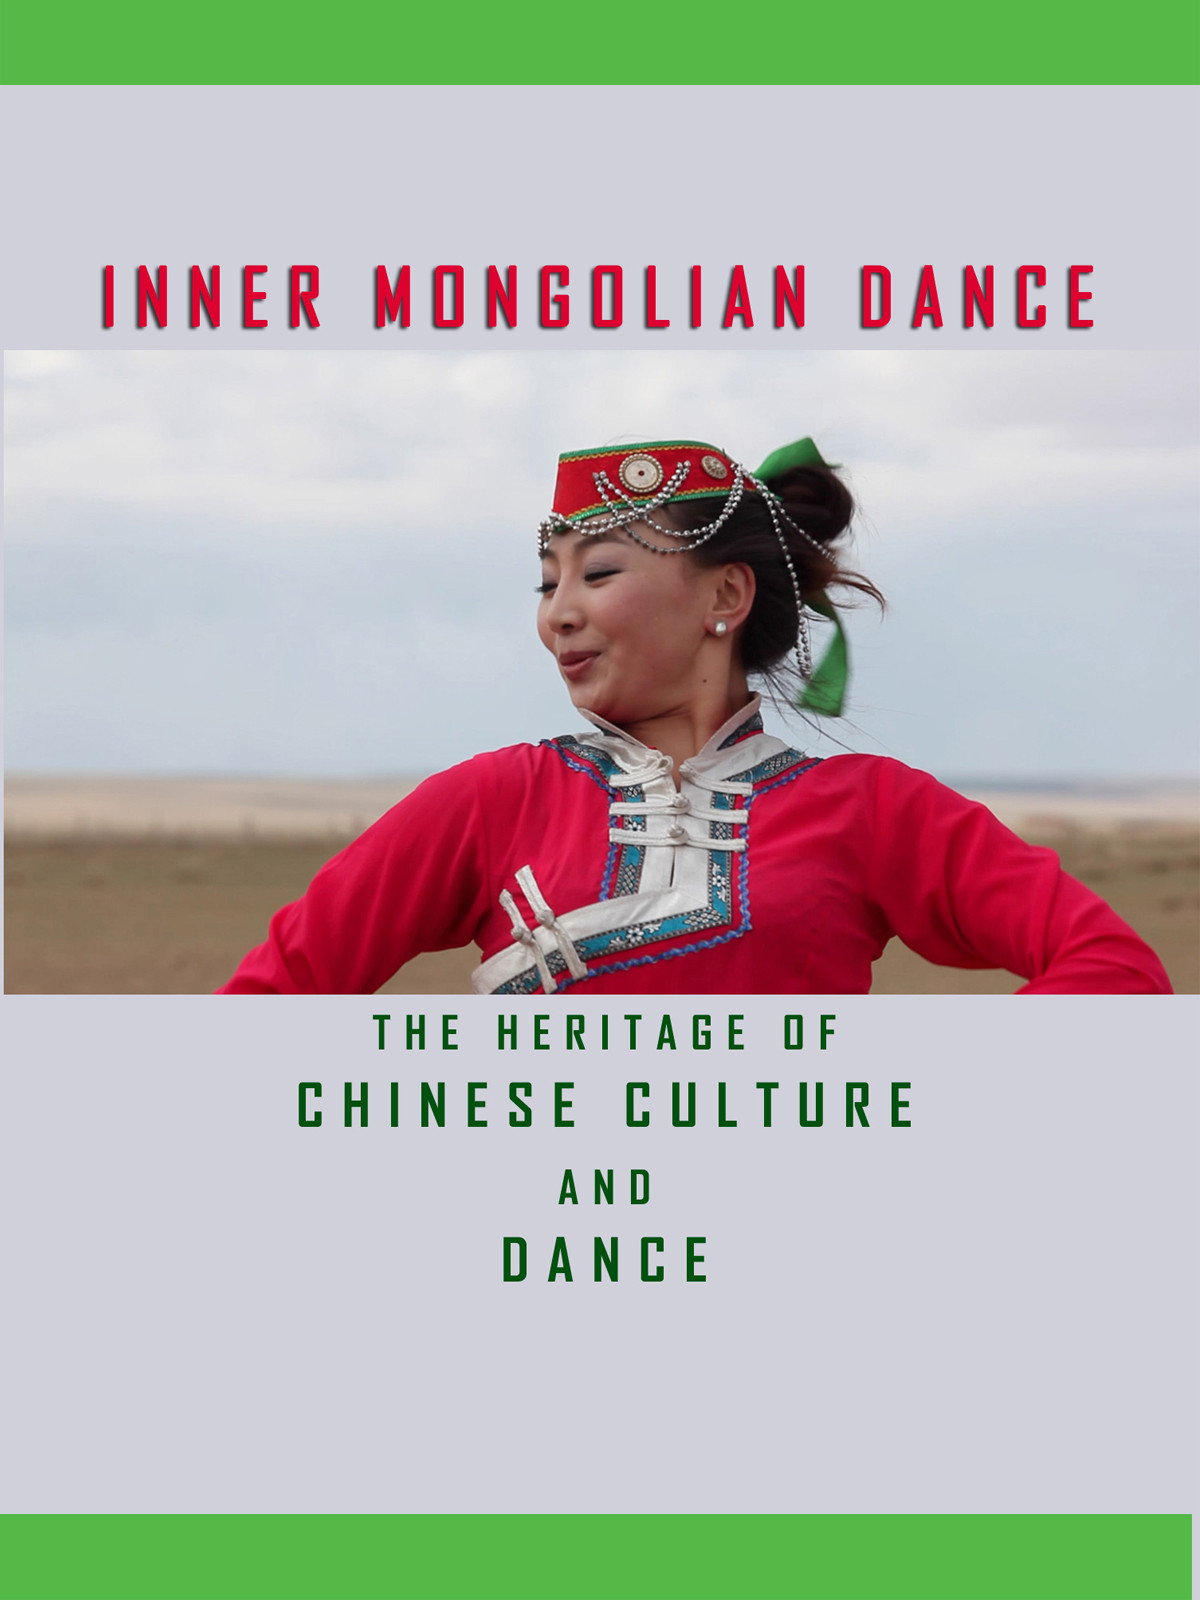 T8926 - The Heritage of Chinese Culture and Dance EthnicEDance-Inner Mongolian